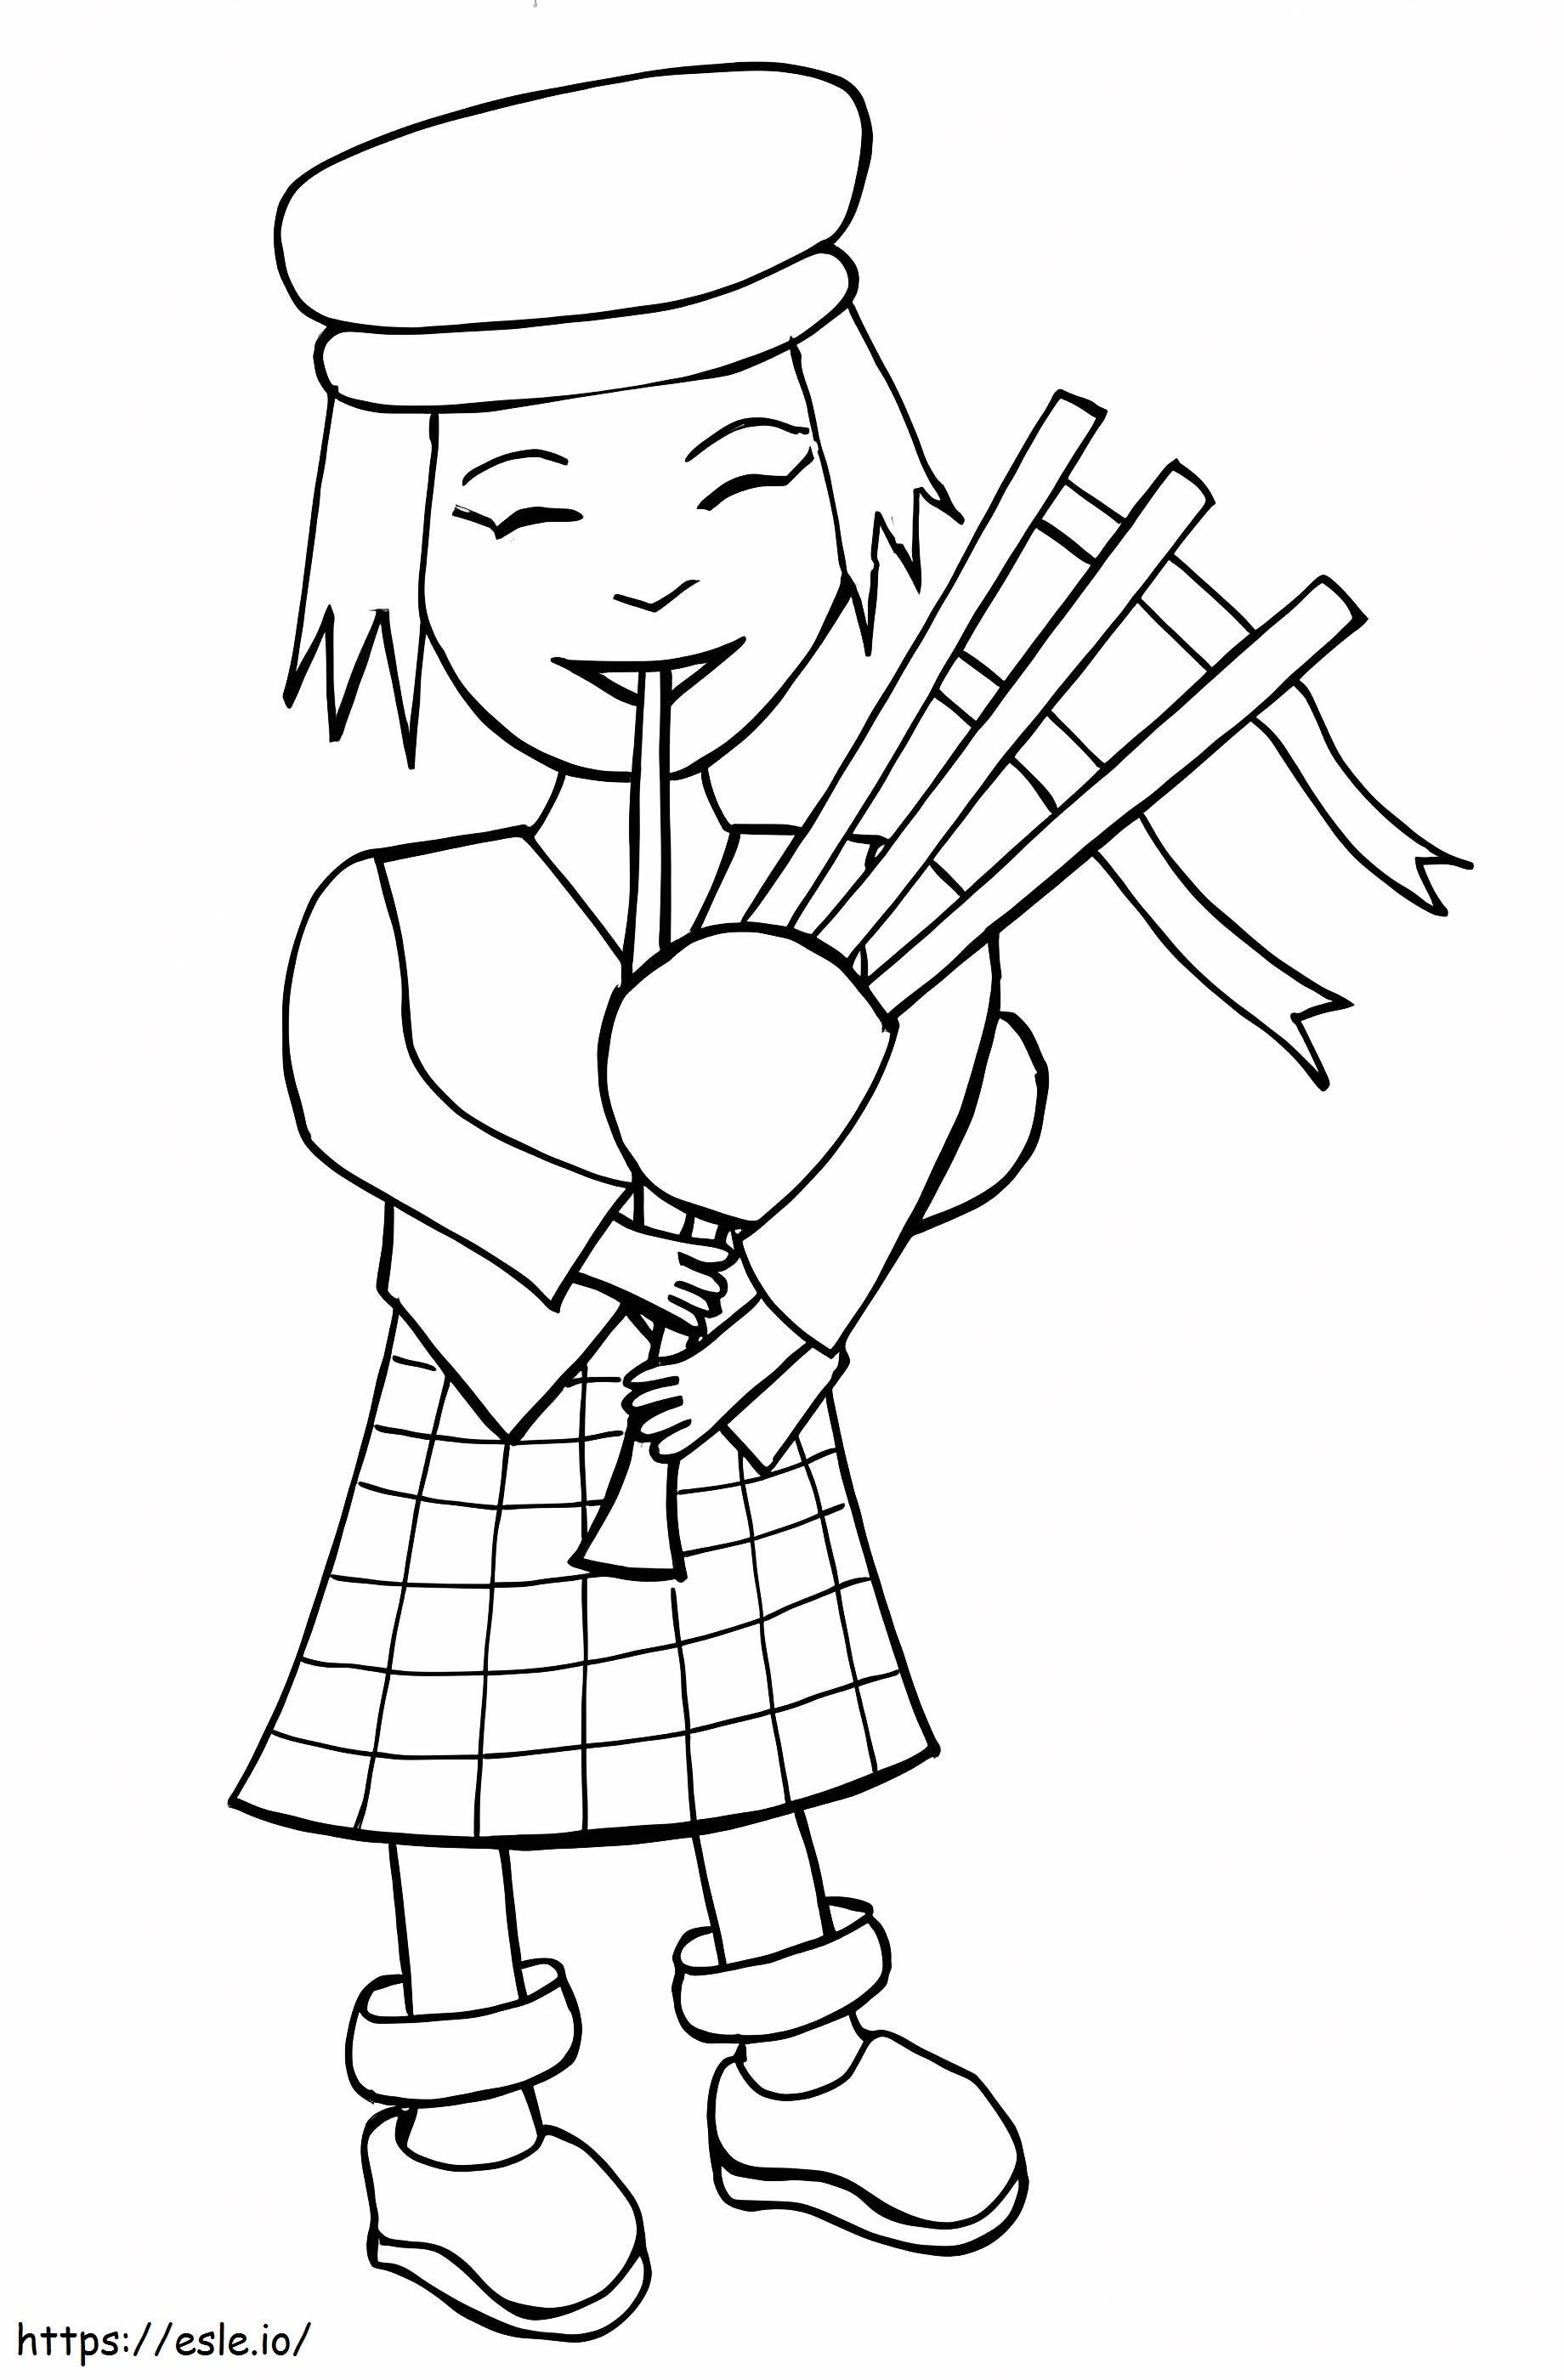 Scottish Girl coloring page